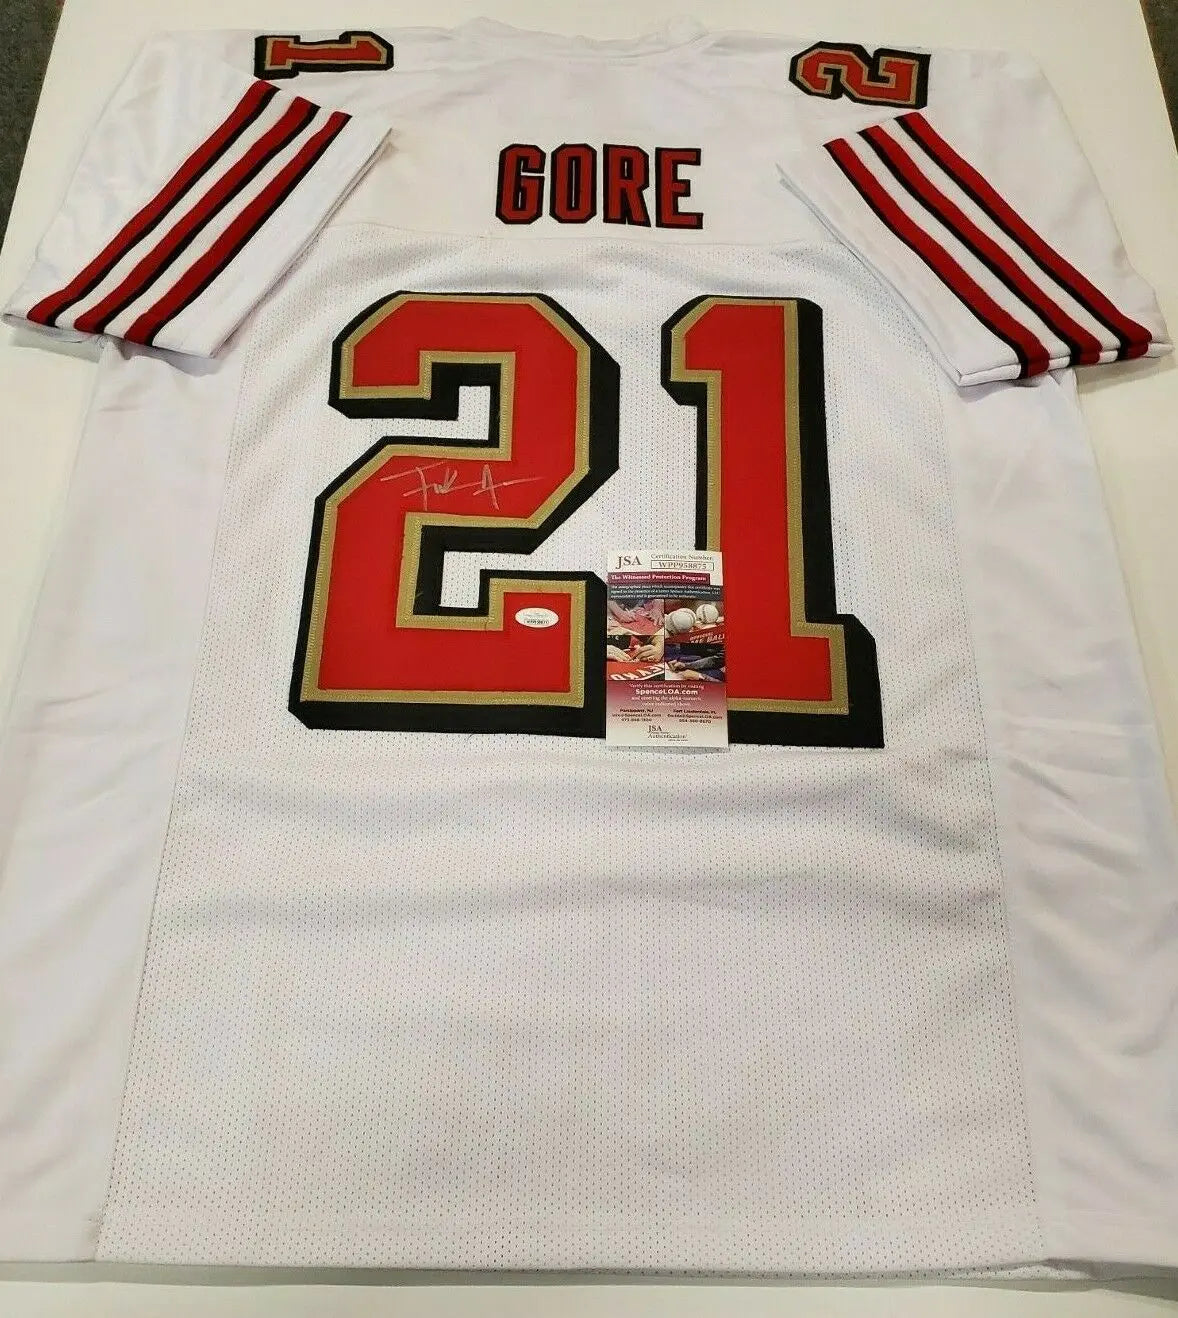 MVP Authentics S.F. 49Ers Frank Gore Autographed Signed Jersey Jsa Coa 116.10 sports jersey framing , jersey framing